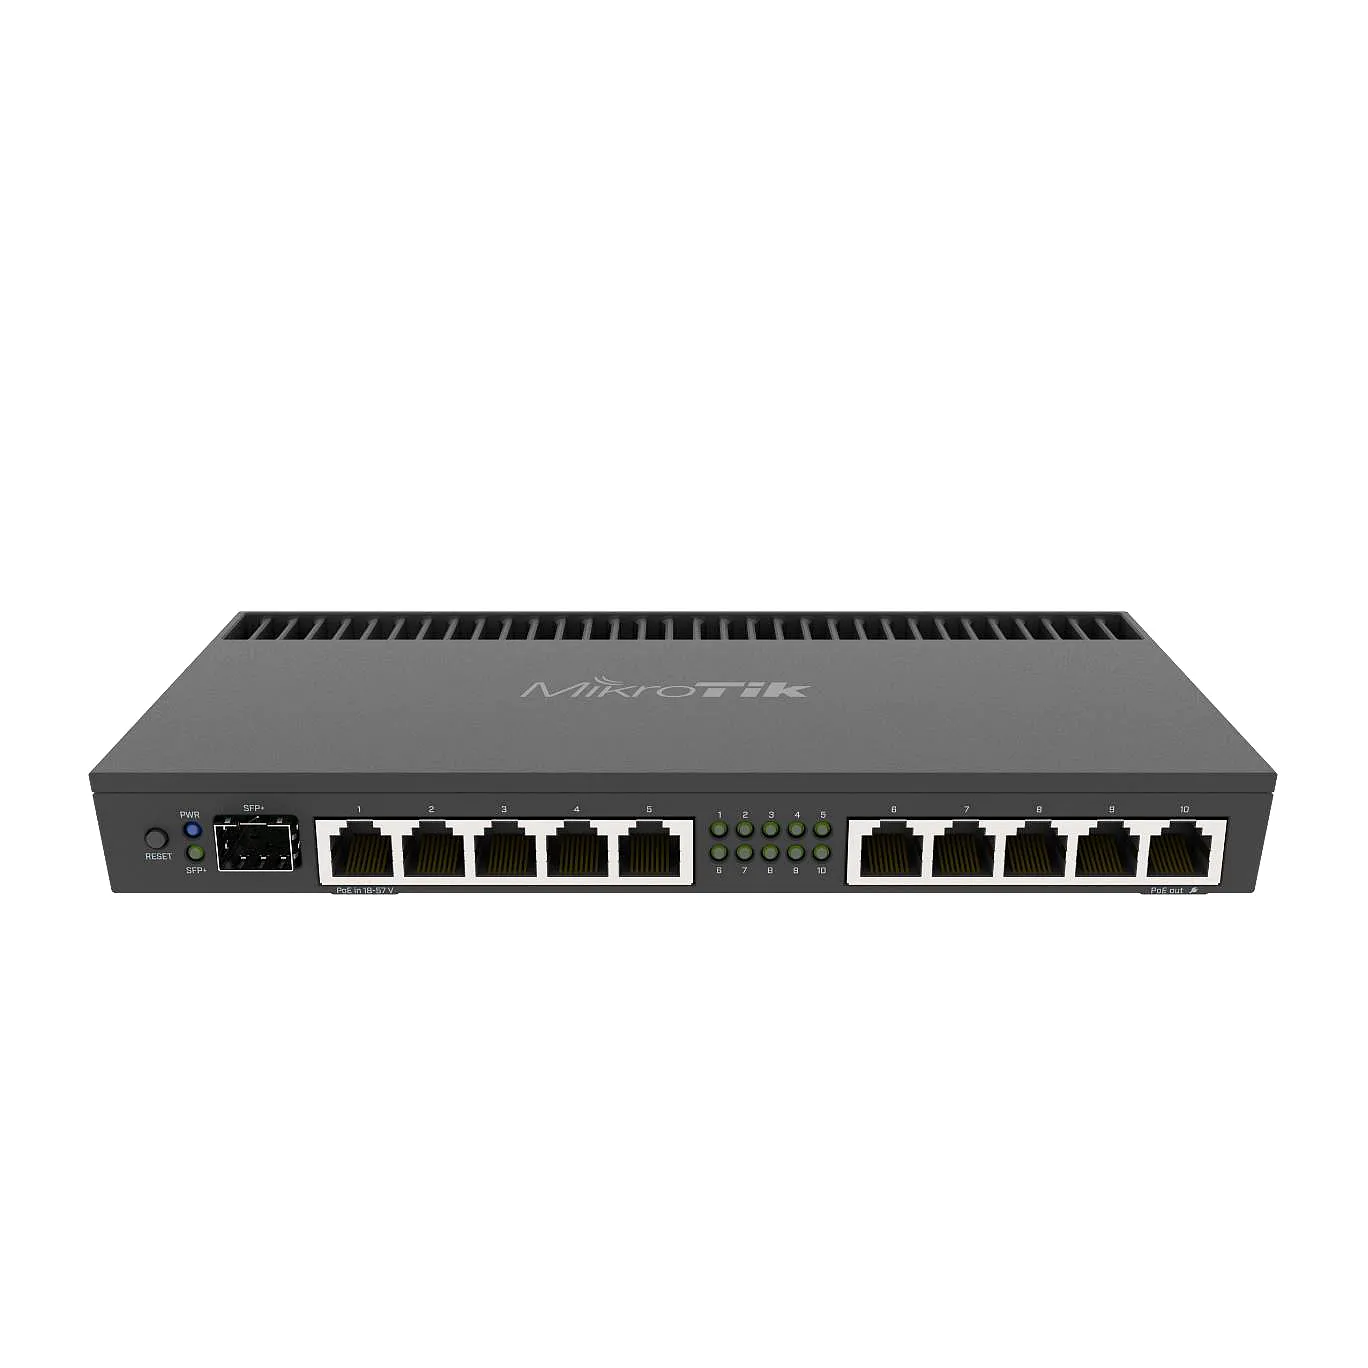 Маршрутизатор Ethernet rb4011igs rm, маршрутизатор mikrotik Ap RB4011iGS + 5aviq2hnd-in MikroTik RB4011iGS